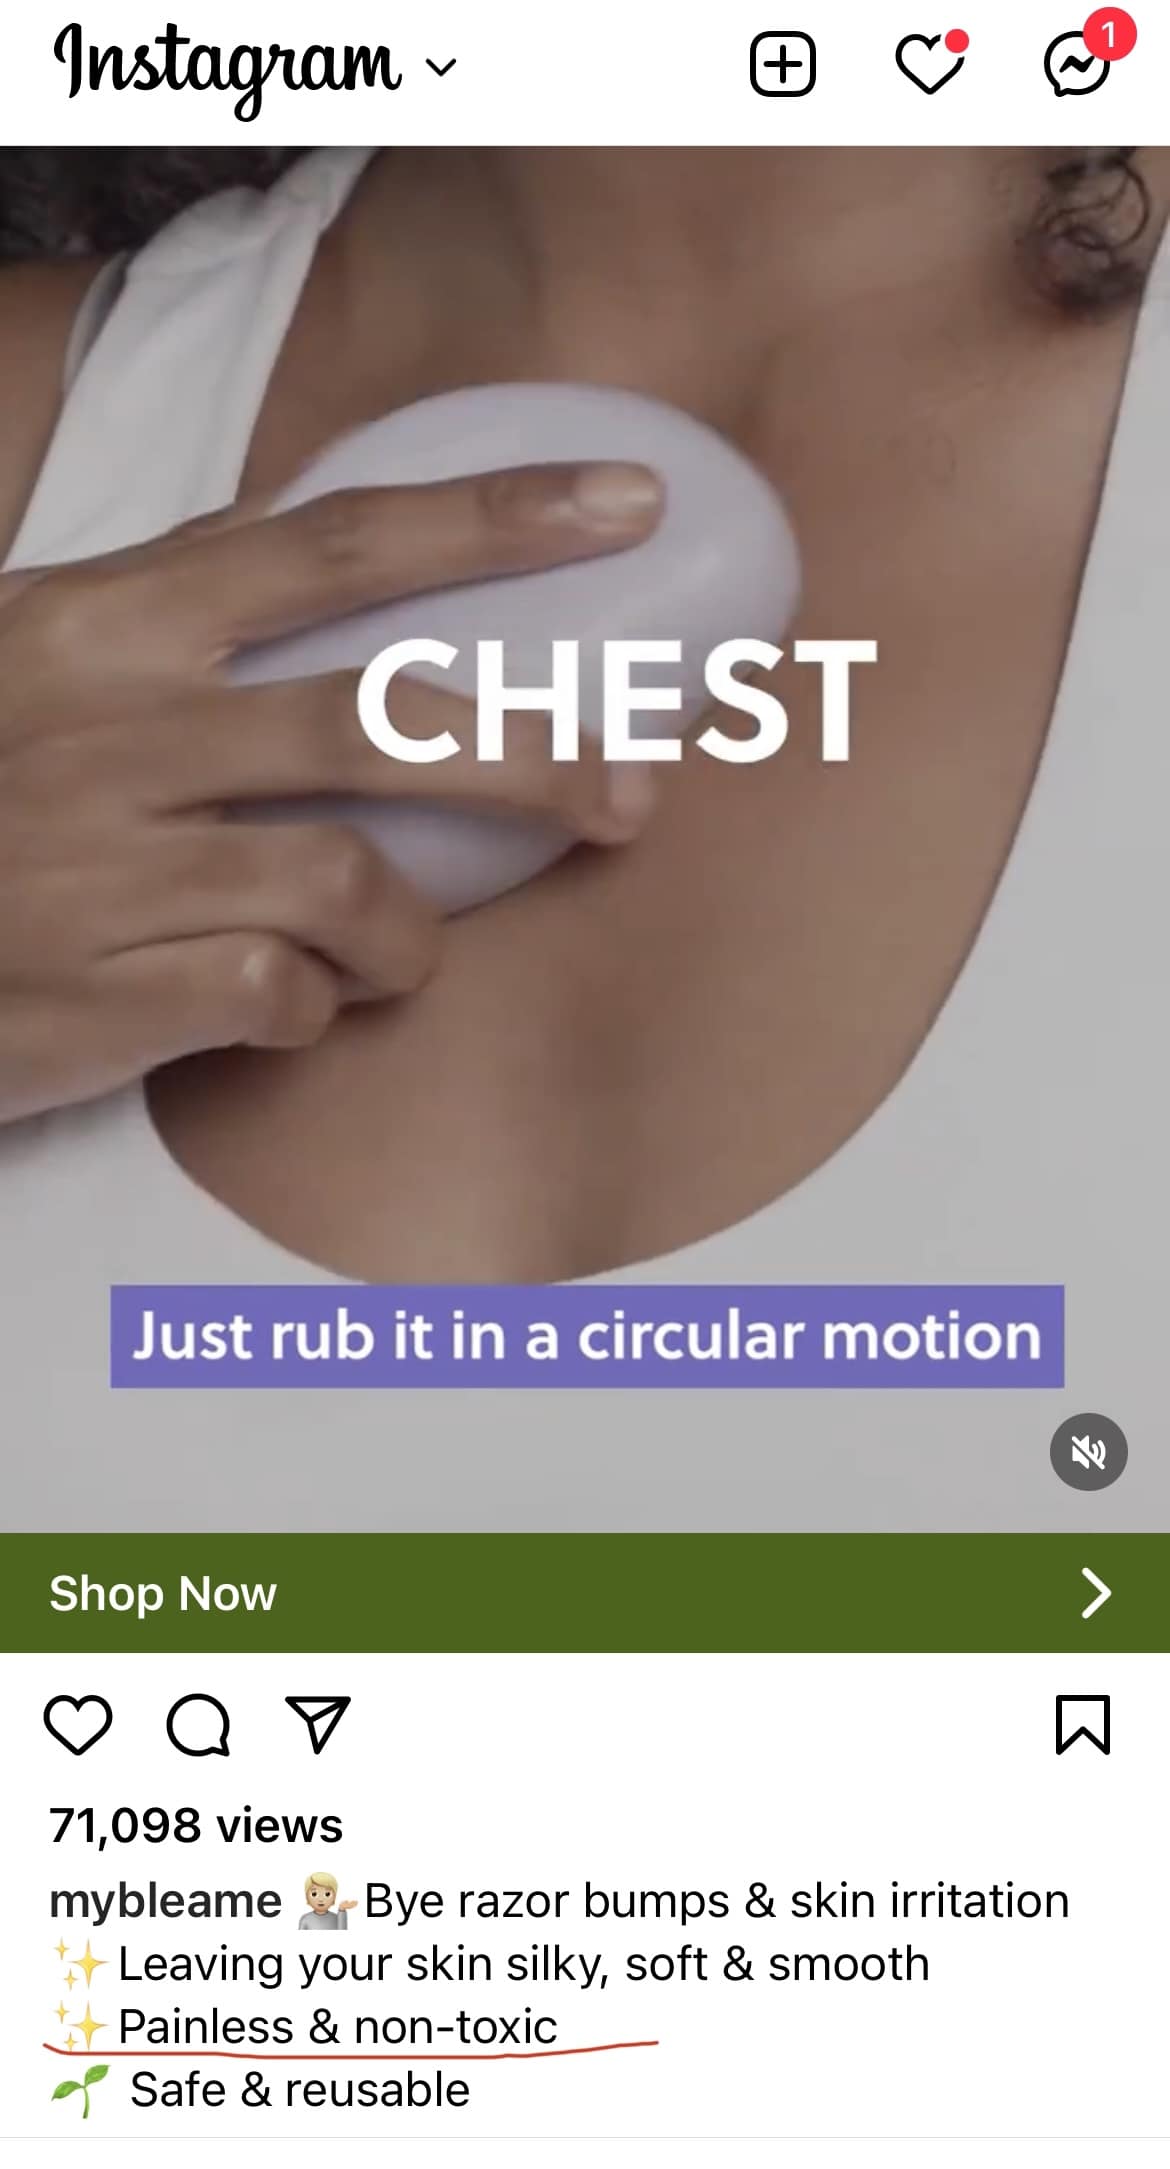 screenshot of Bleame Instagram ad claiming product is "painless".